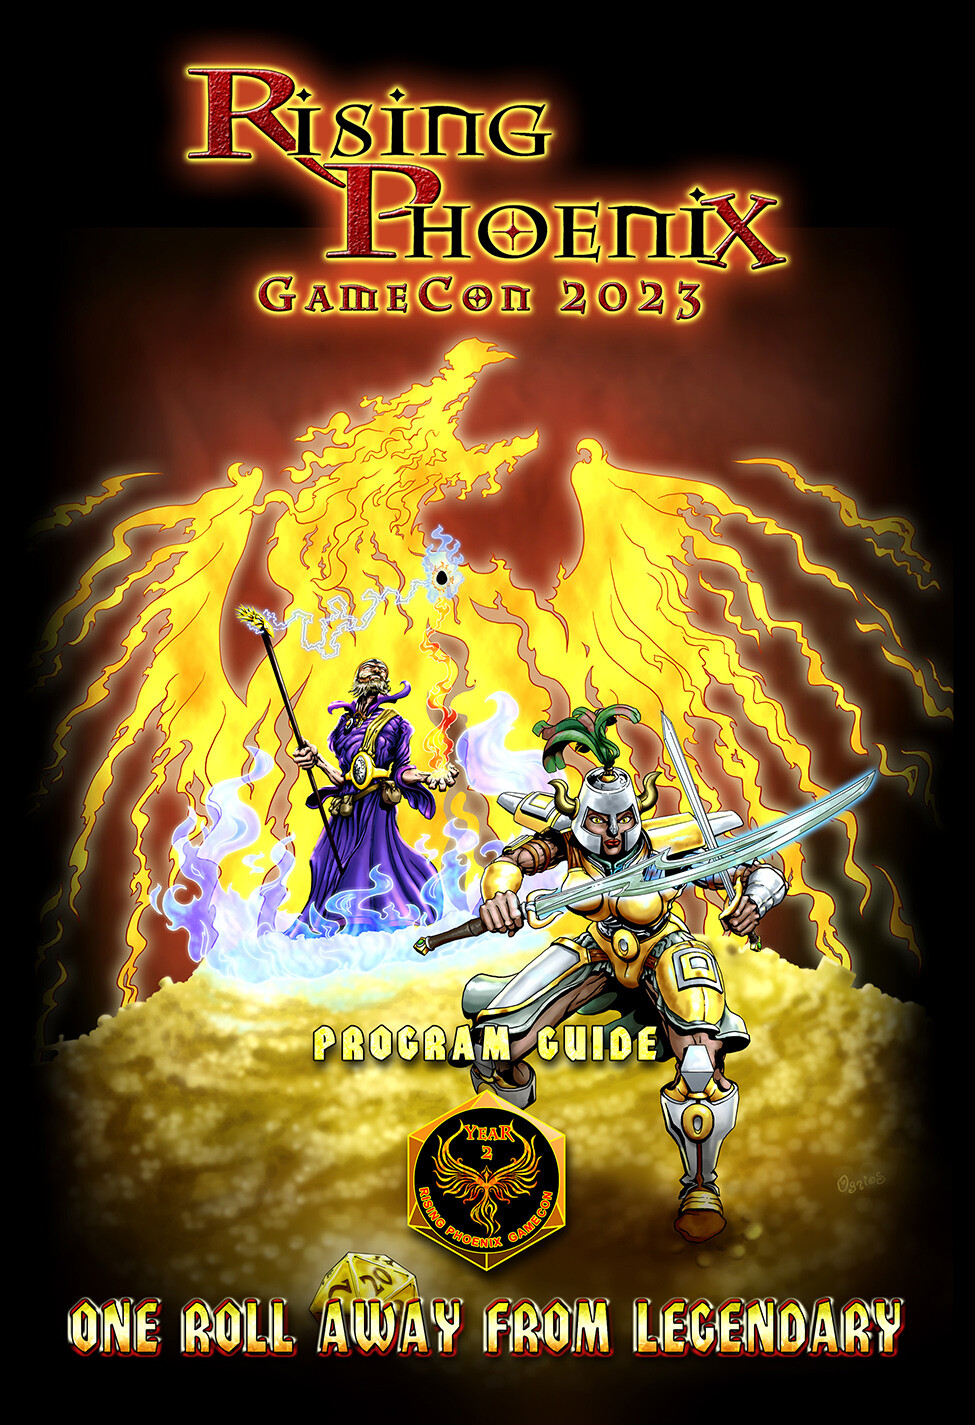 "Legendary" Annual Illustration and Program Cover Graphics for Rising Phoenix GameCon 2023